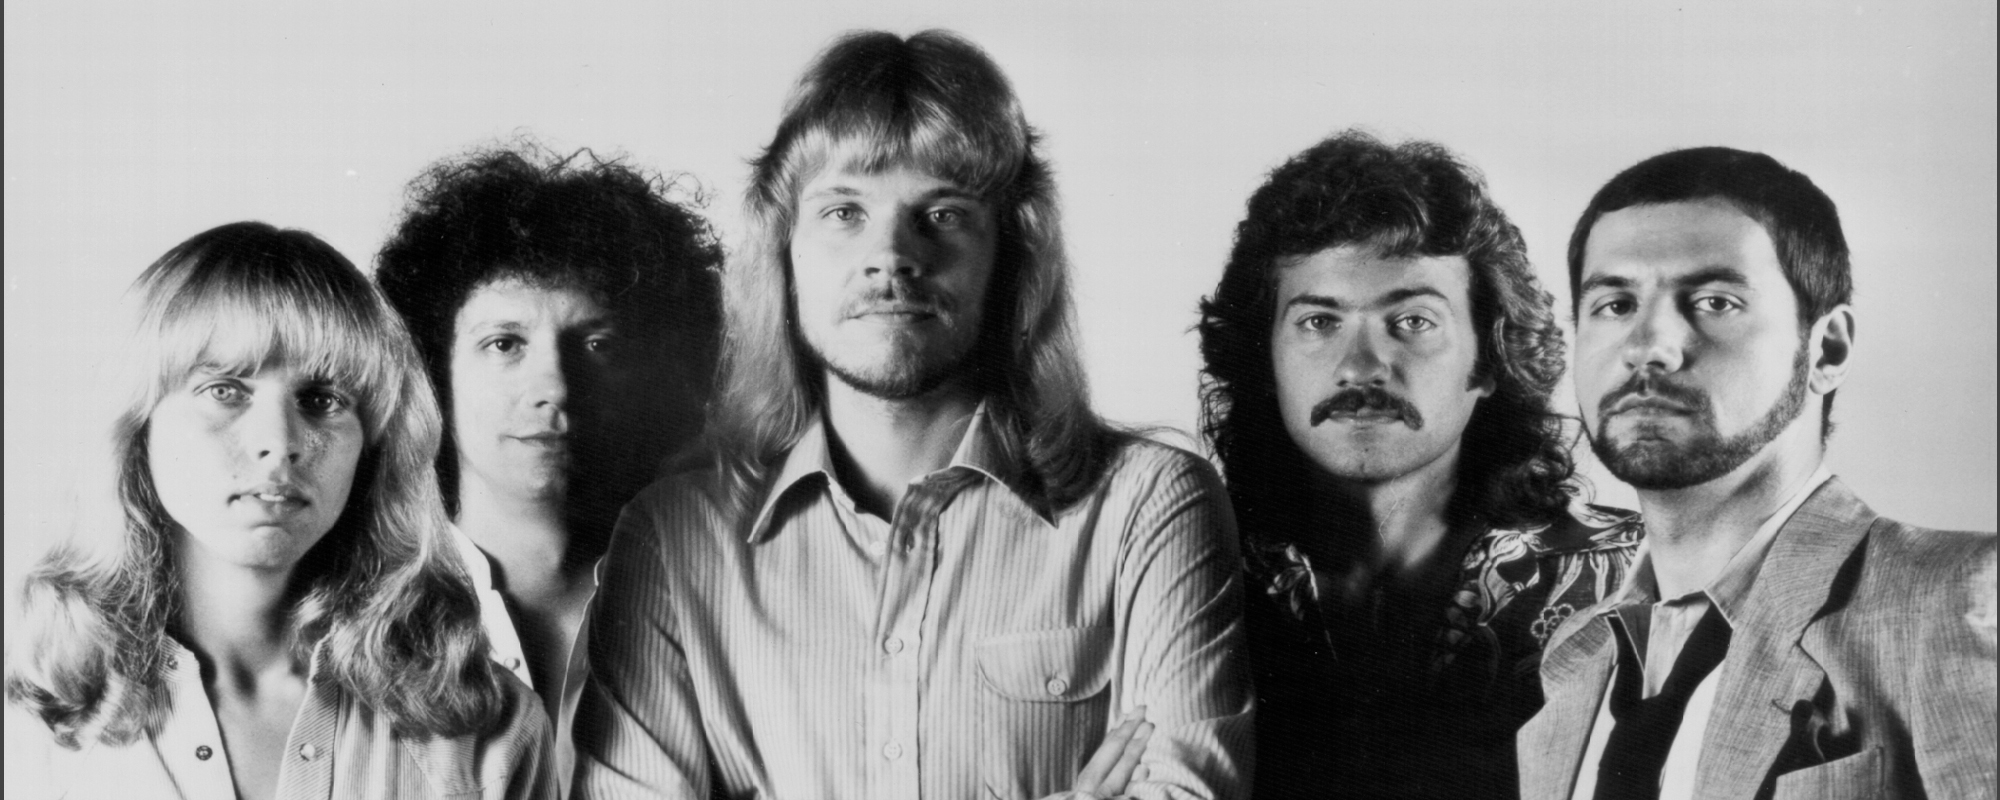 Behind the Band Name: Styx